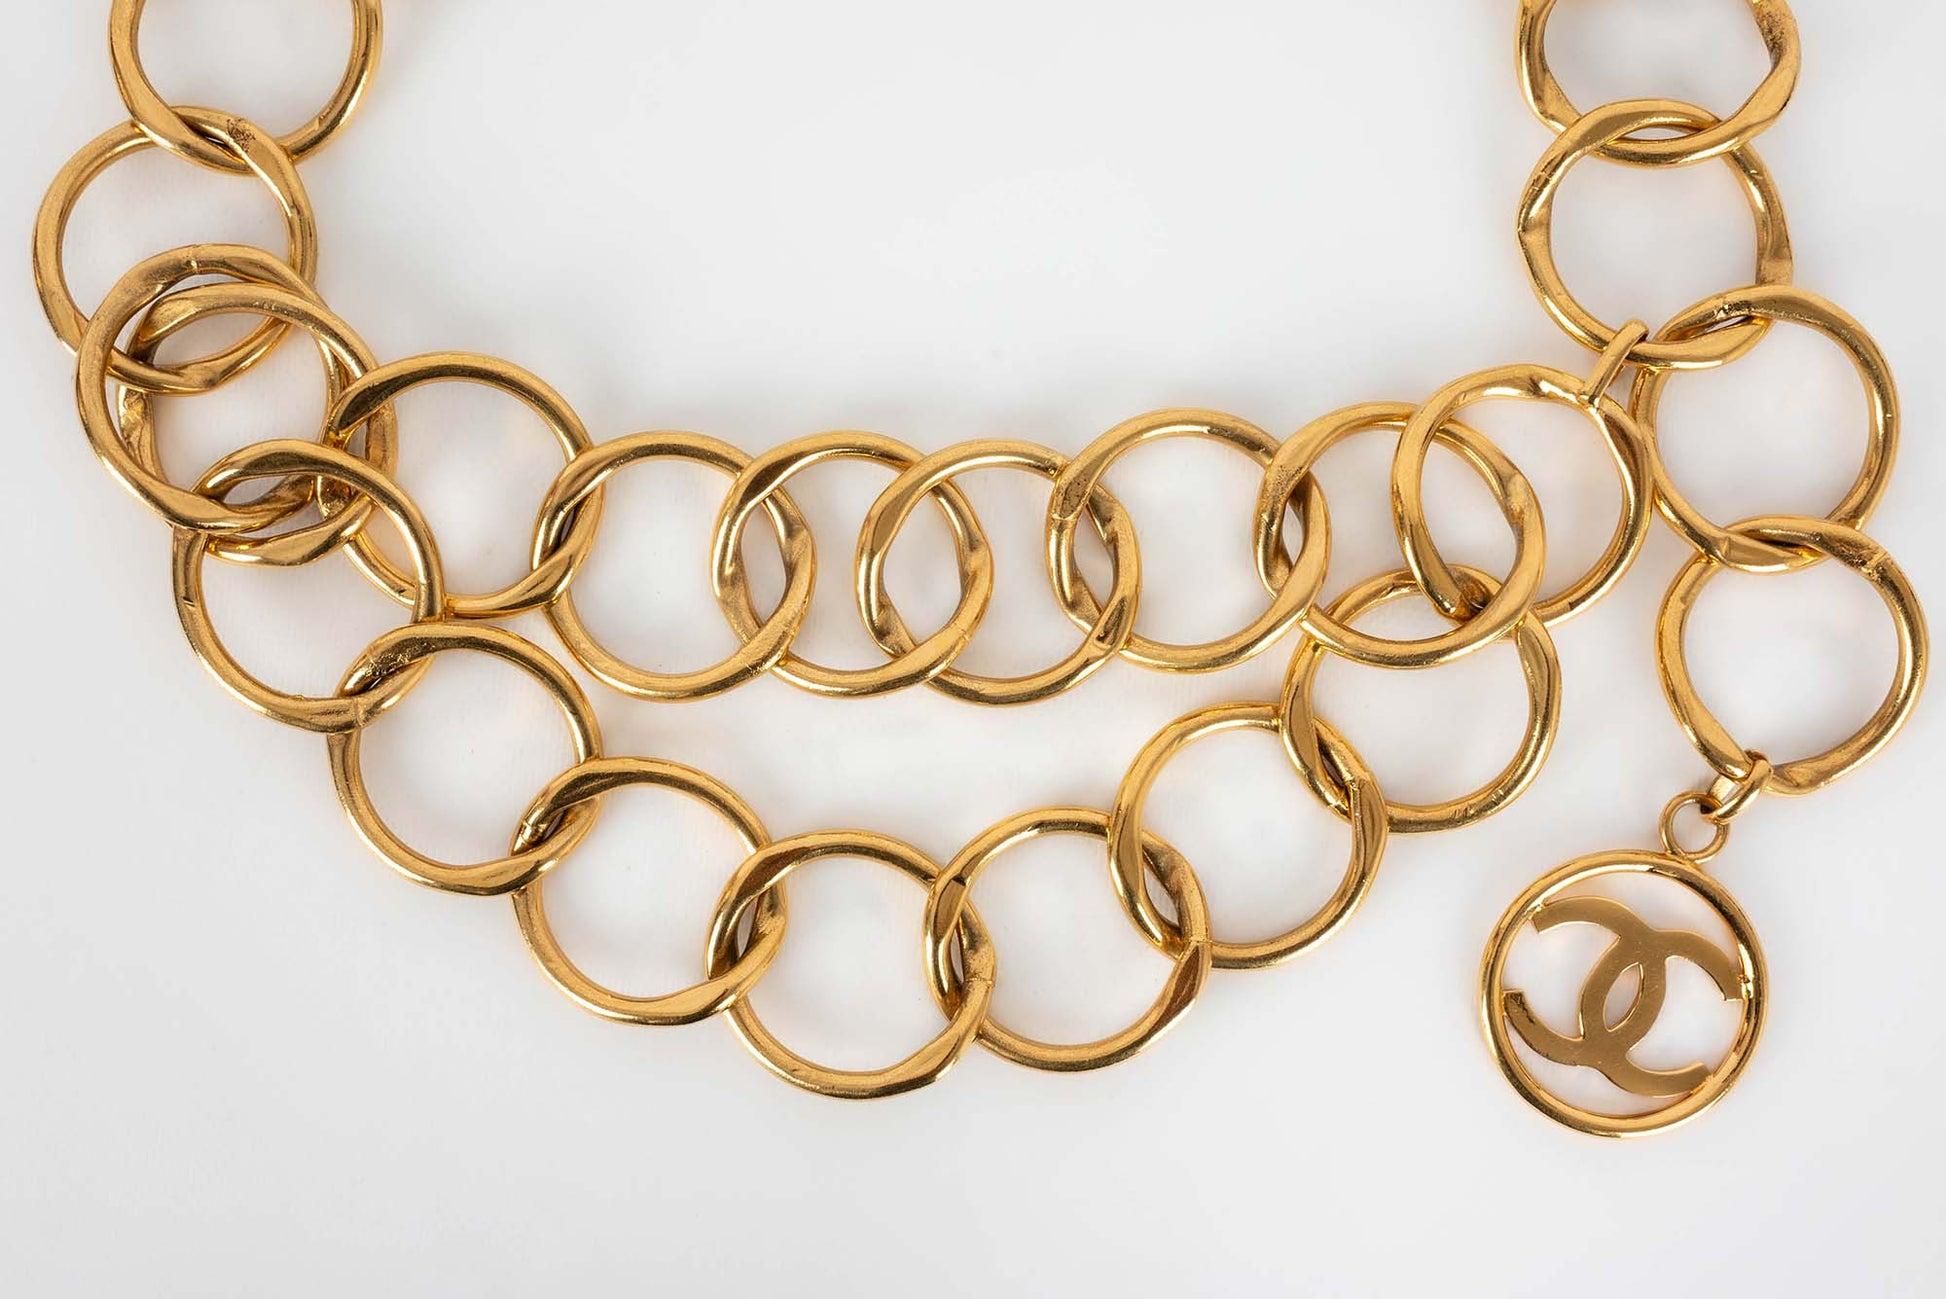 Chanel - (Made in France) Belt composed of big links in gold-plated metal from the beginning of the 1990s. 2cc9 Collection.

Additional information:
Condition: Very good condition
Dimensions: Length: 96 cm
Period: 20th Century

Seller Reference: